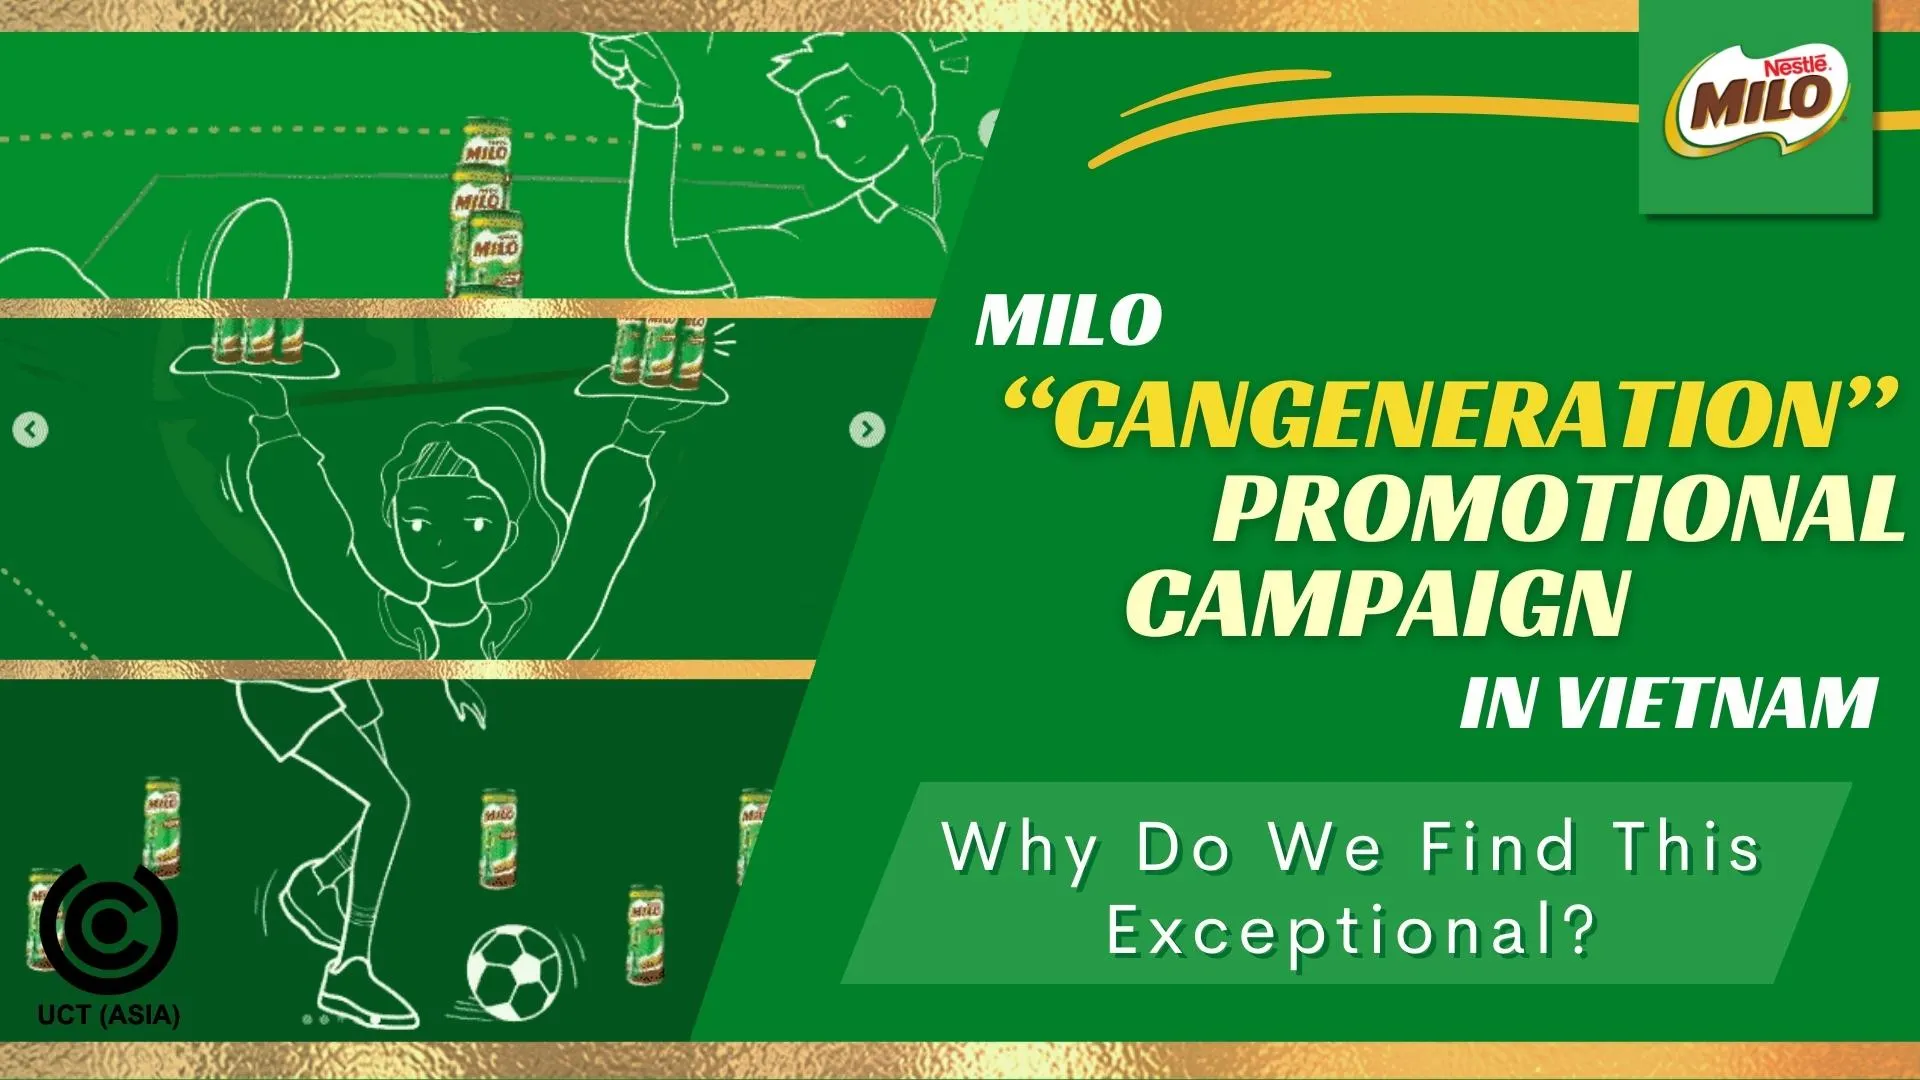 Milo_“Cangeneration”_Promotional_Campaign_In_Vietnam_–_Why_Do_We_Find_This_Exceptional (1)